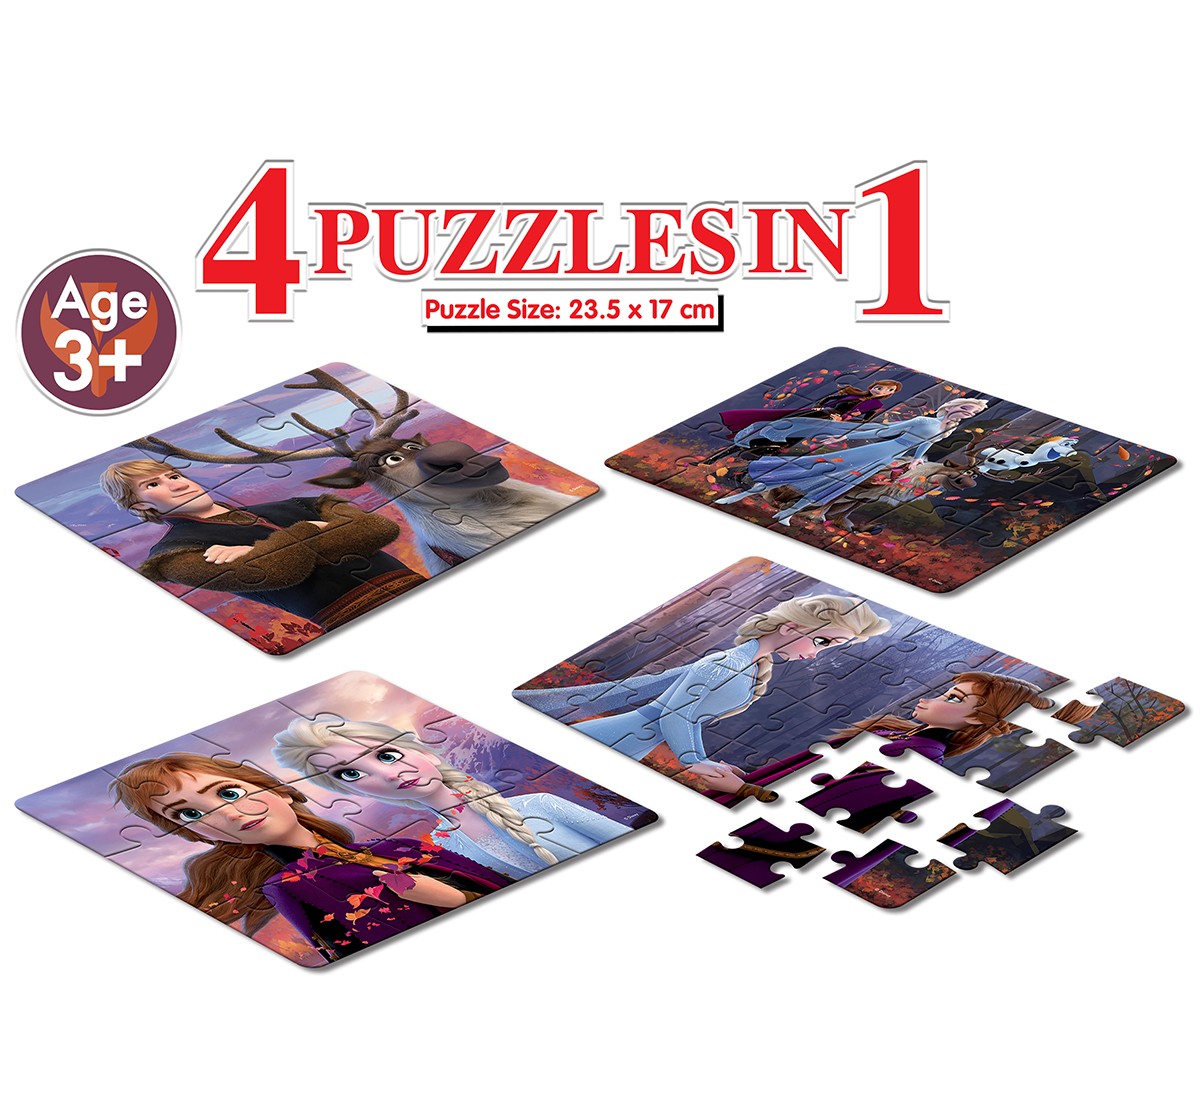 Frank Frozen II - 4  In 1 Puzzles for age 3Y+ 